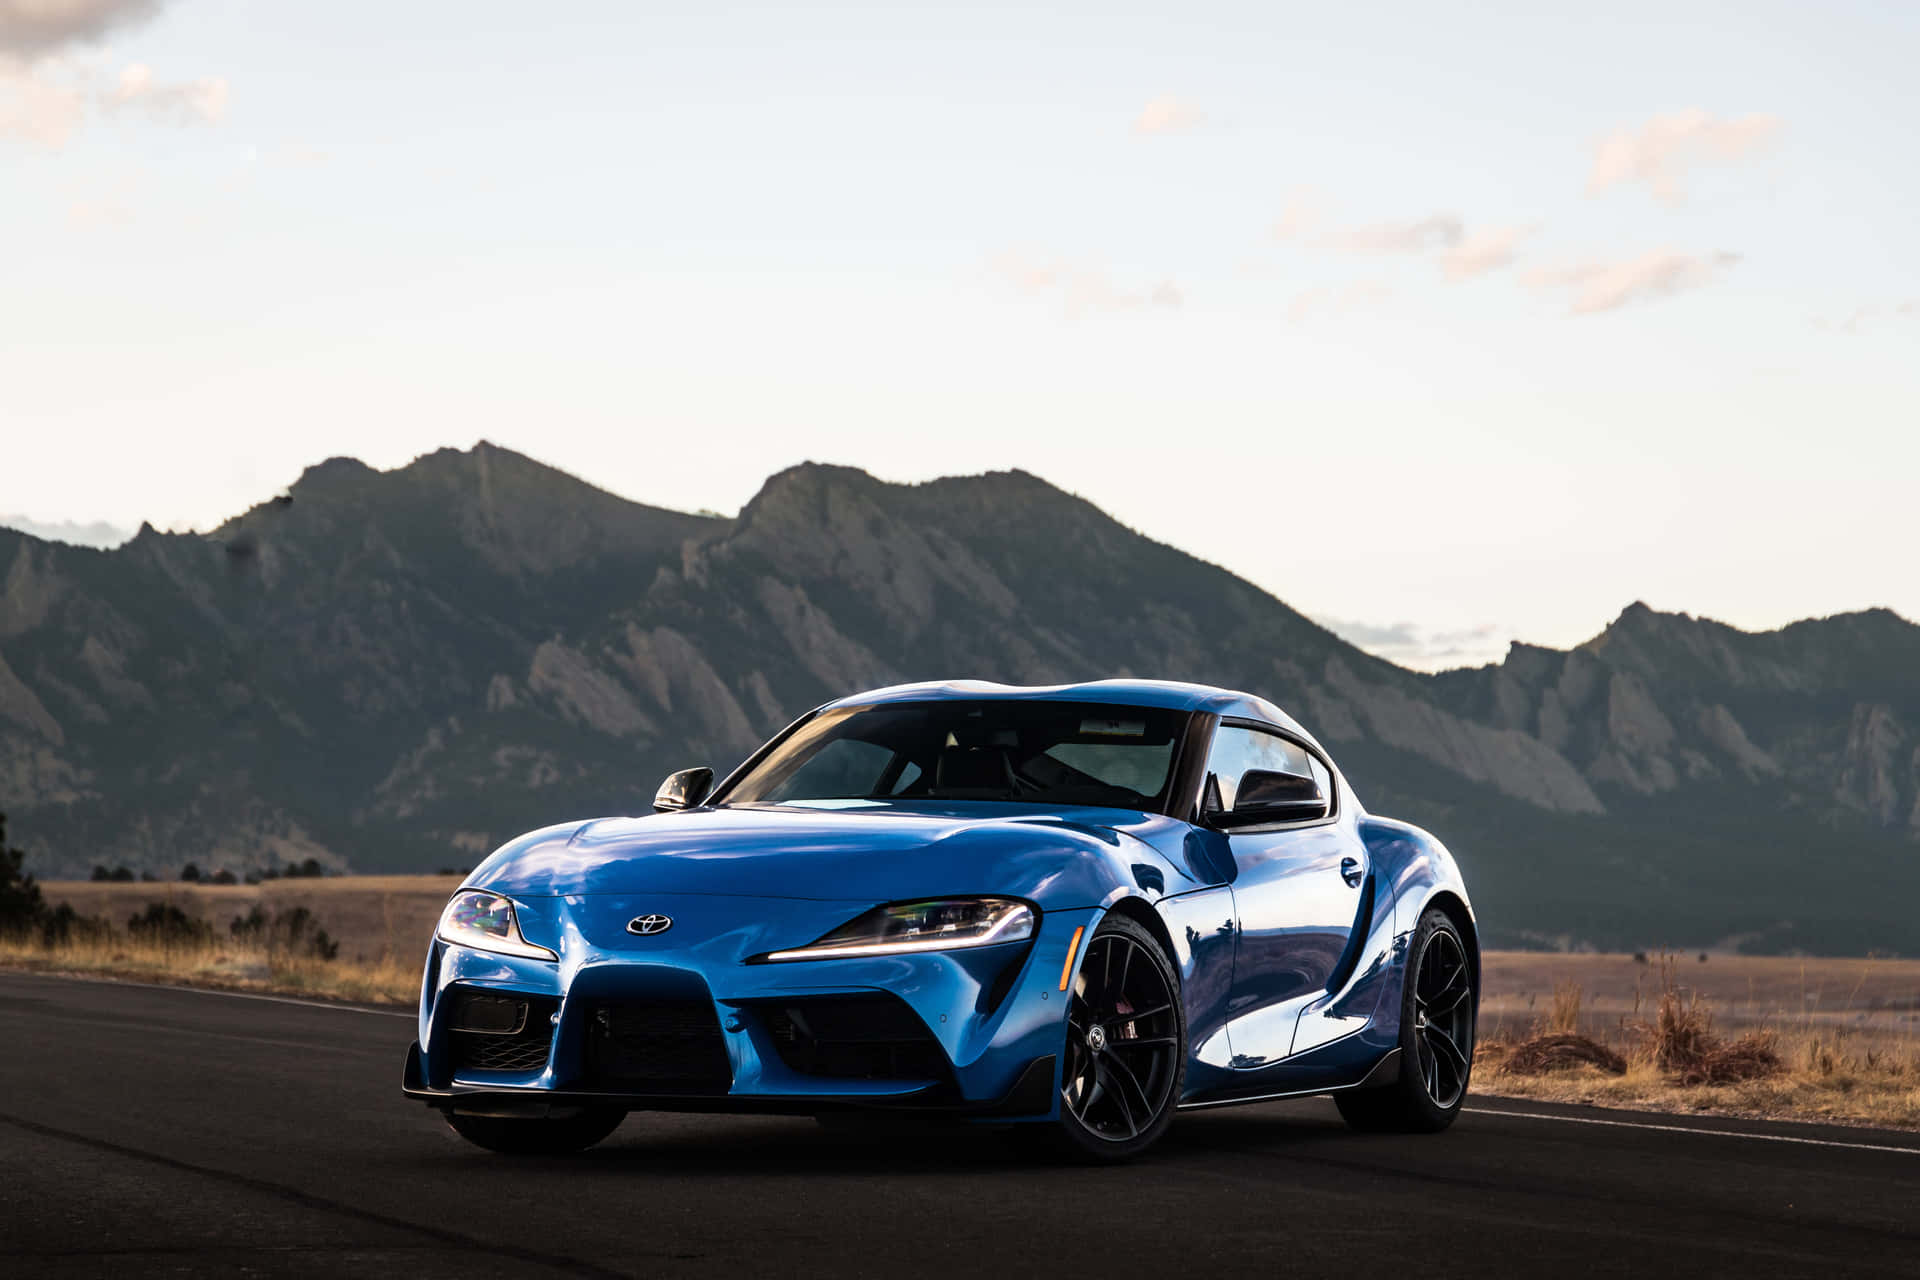 Stunning Supra sports car on a scenic road